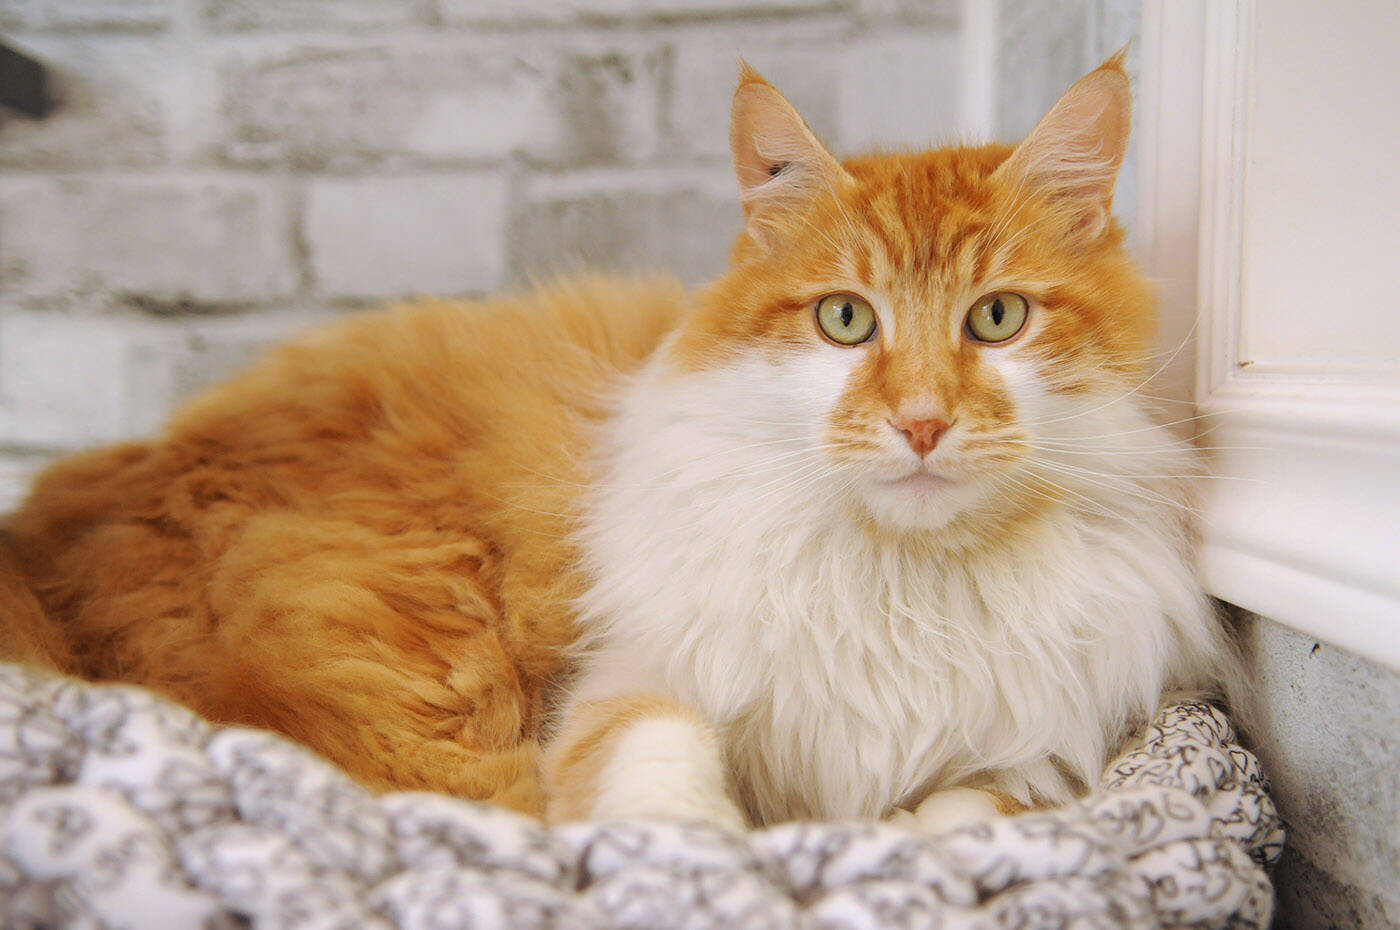 The first cat to grace The Book Mans new cat adoption window is an orange-and-white, long-haired cat named Butters. (Jenna Hauck/ Chilliwack Progress)